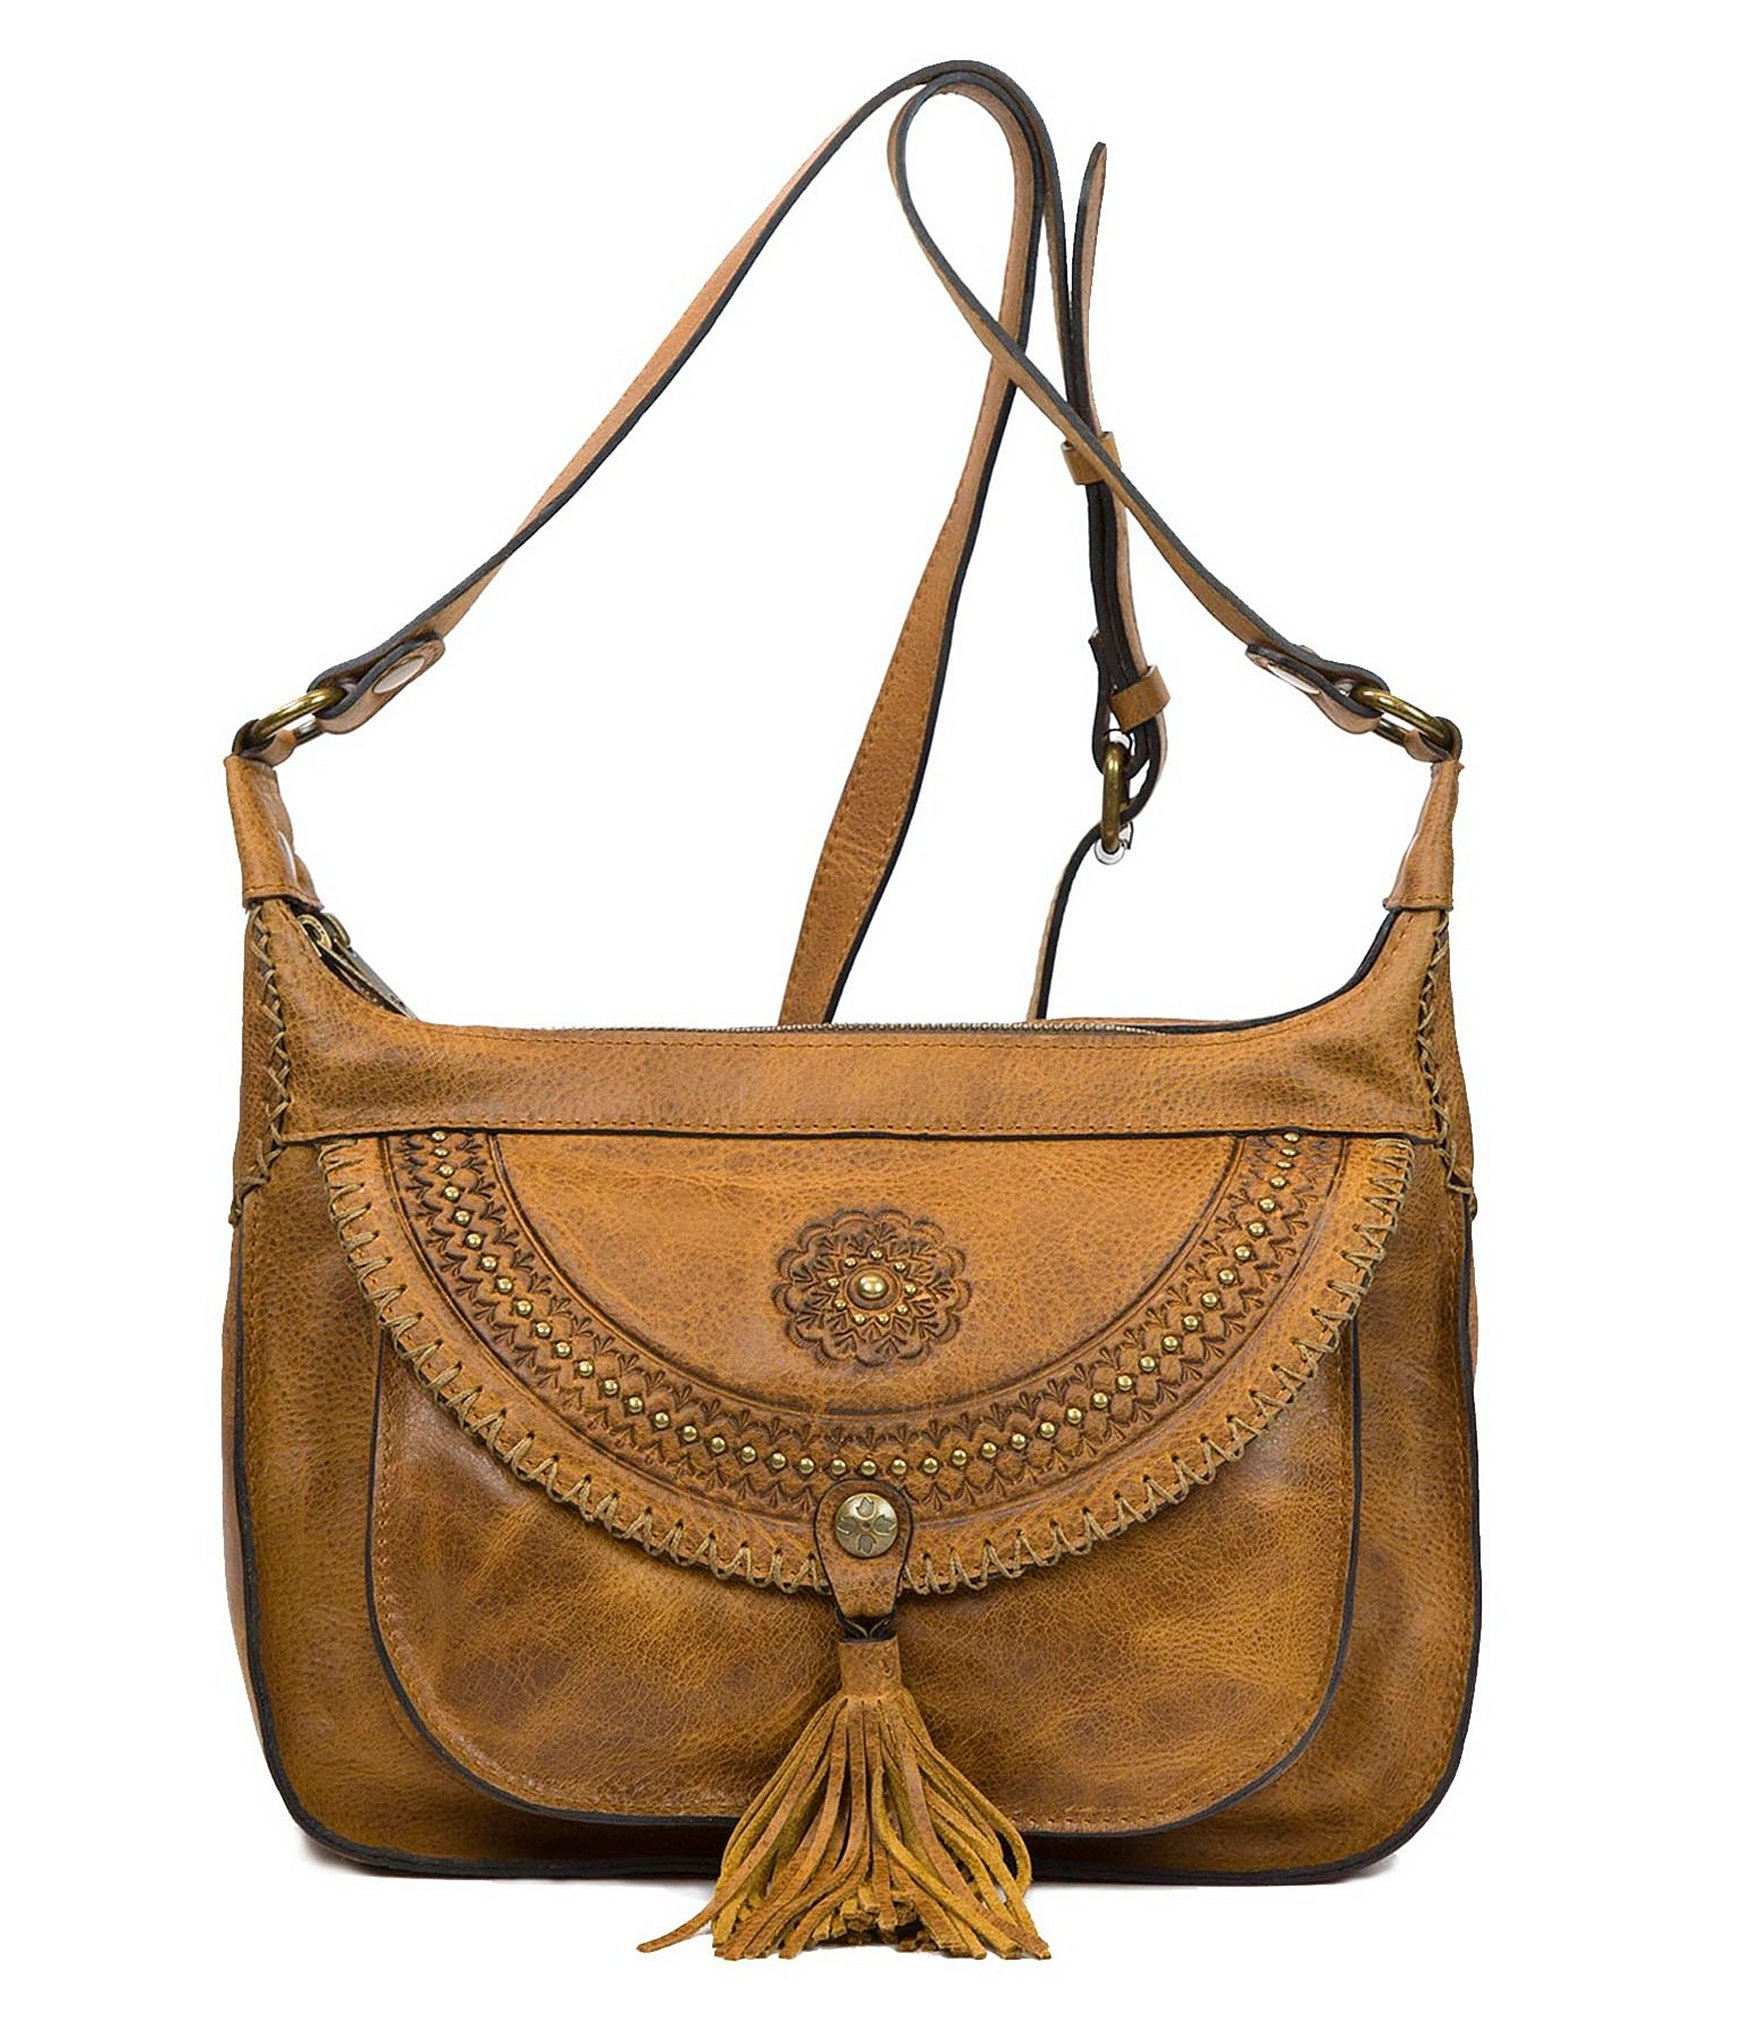 Patricia nash Distressed Vintage Collection Camilia Studded Tasseled Square Hobo Bag in Brown | Lyst